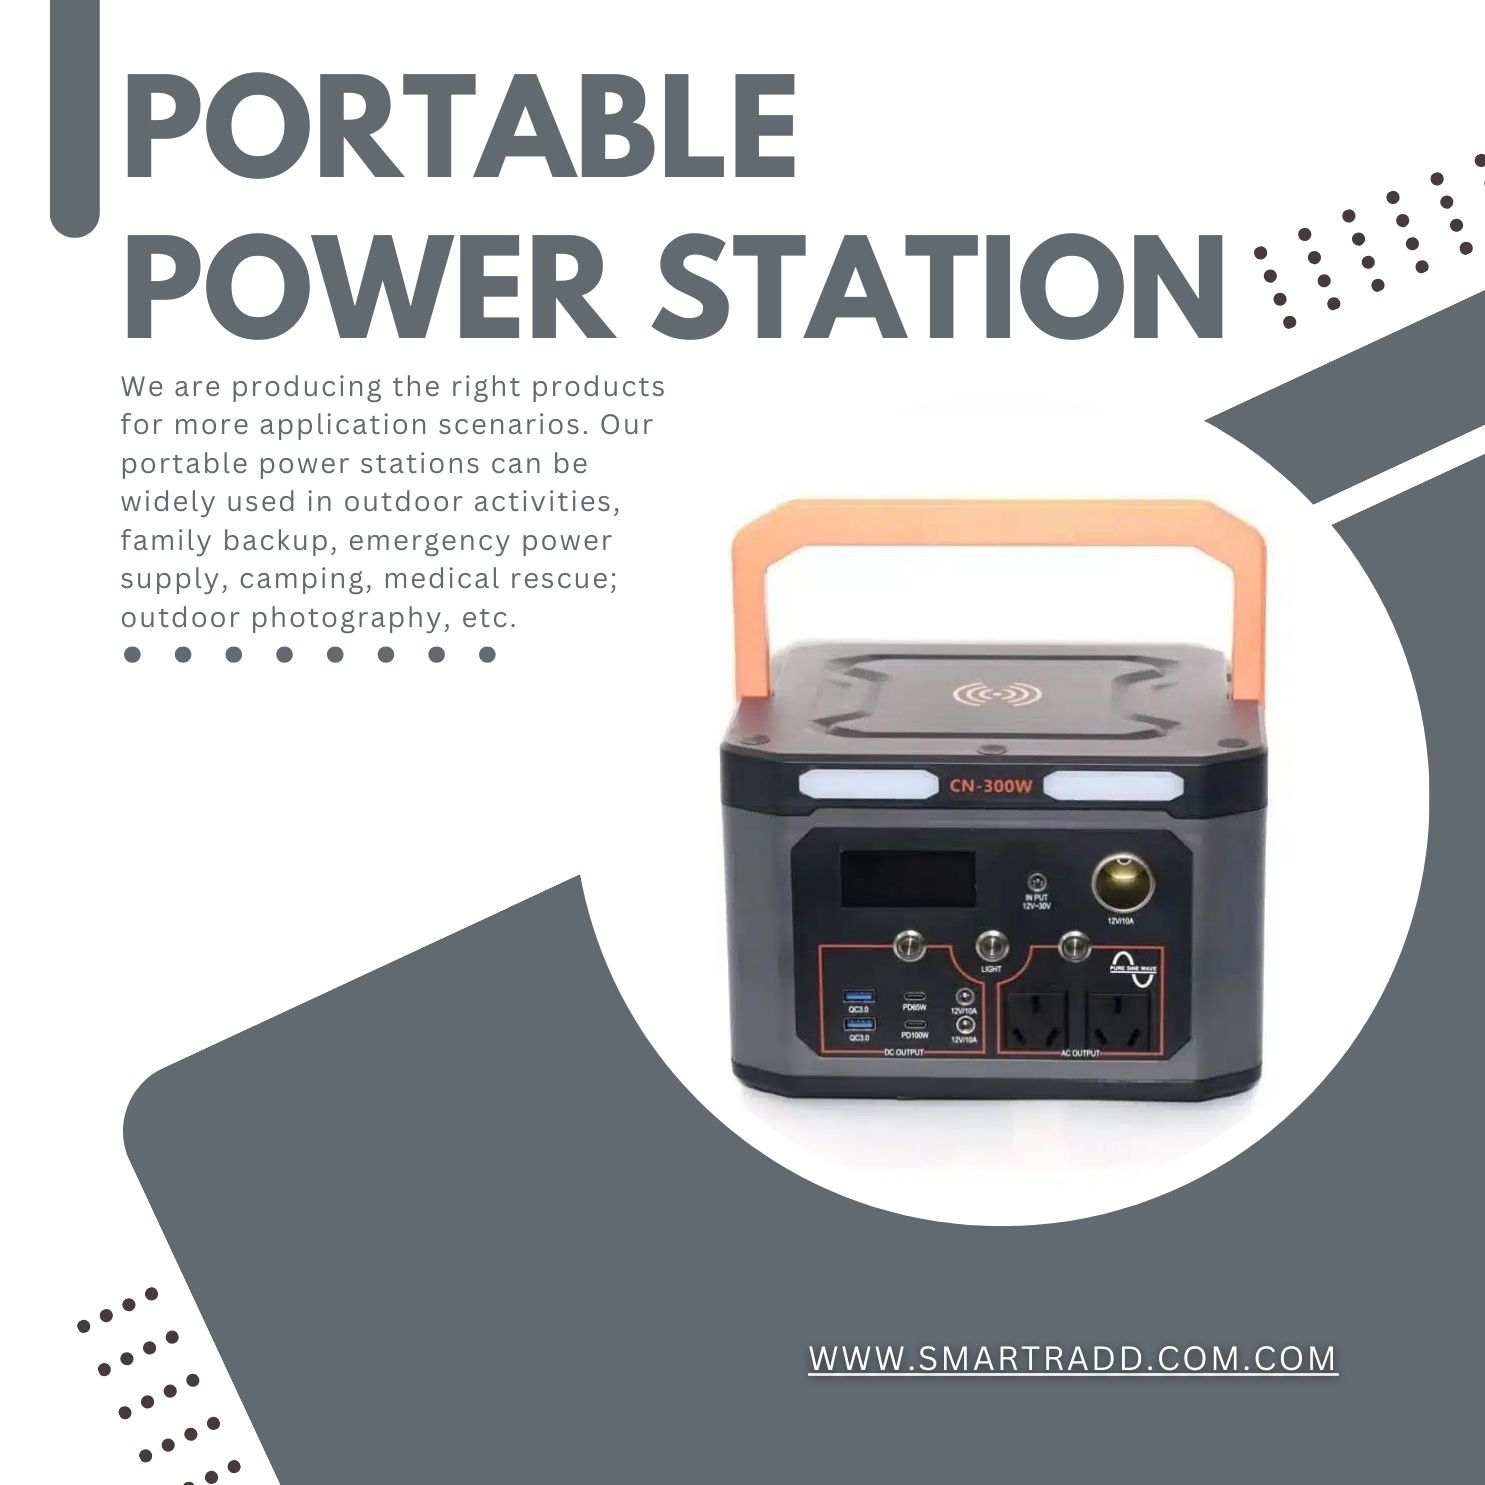 Find the Right Portable Power Station Supplier and Home Power Wall